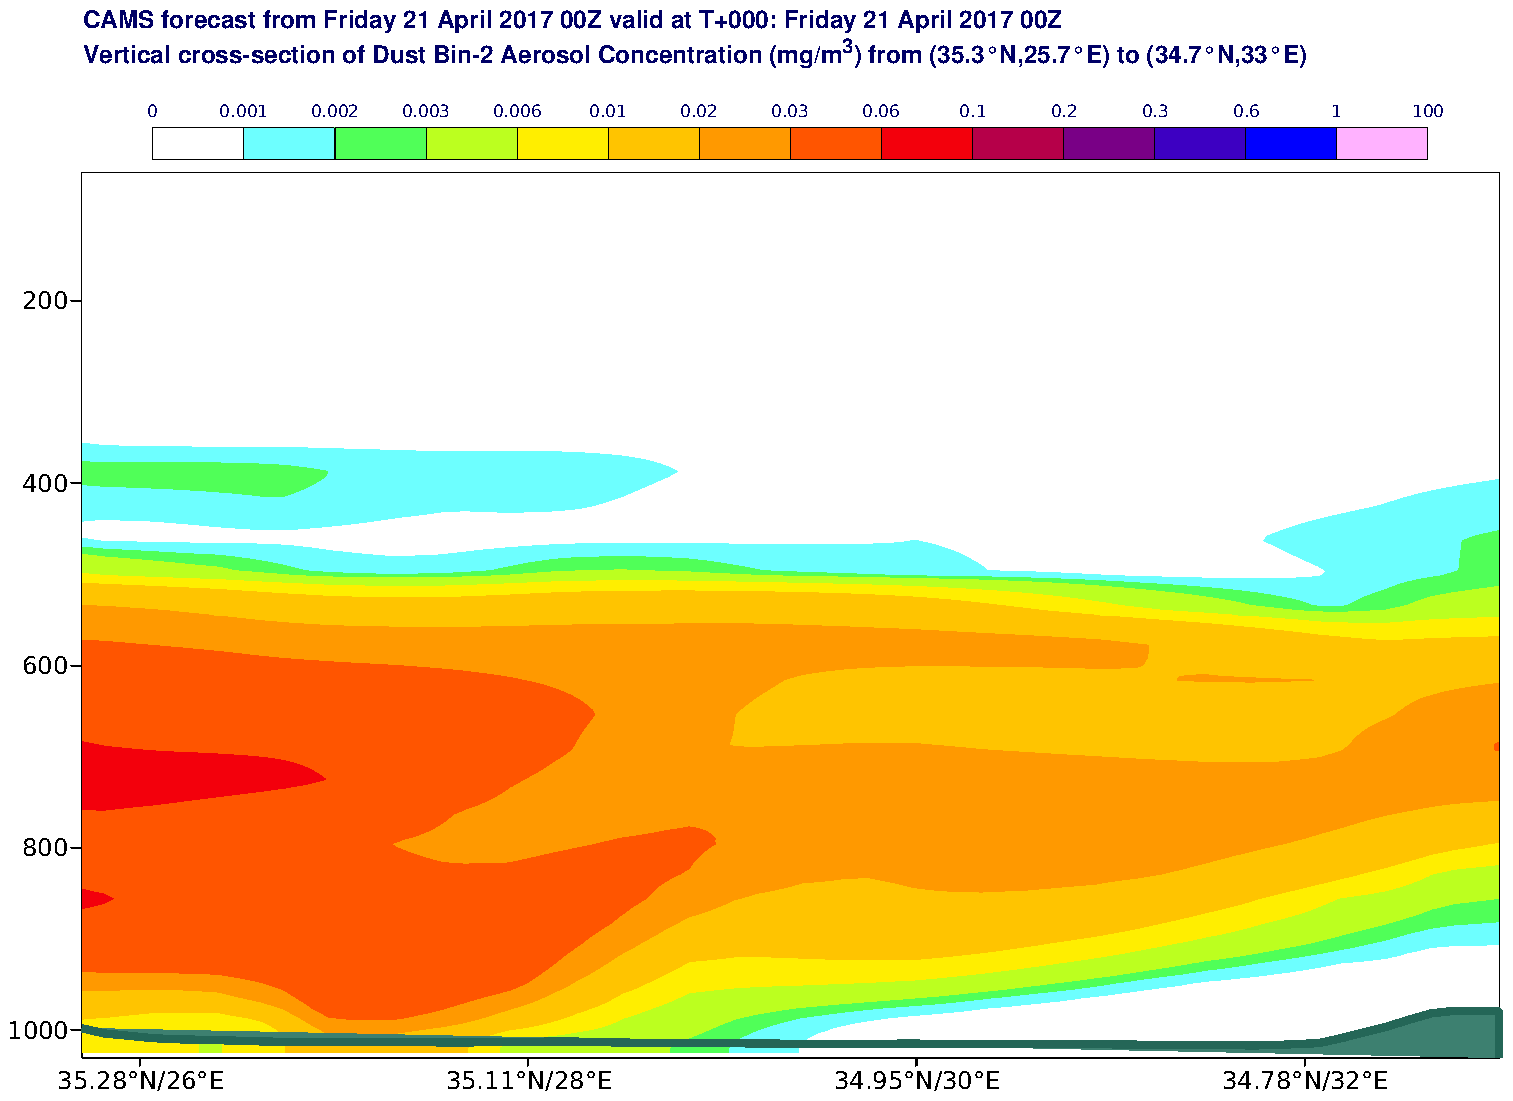 Vertical cross-section of Dust Bin-2 Aerosol Concentration (mg/m3) valid at T0 - 2017-04-21 00:00